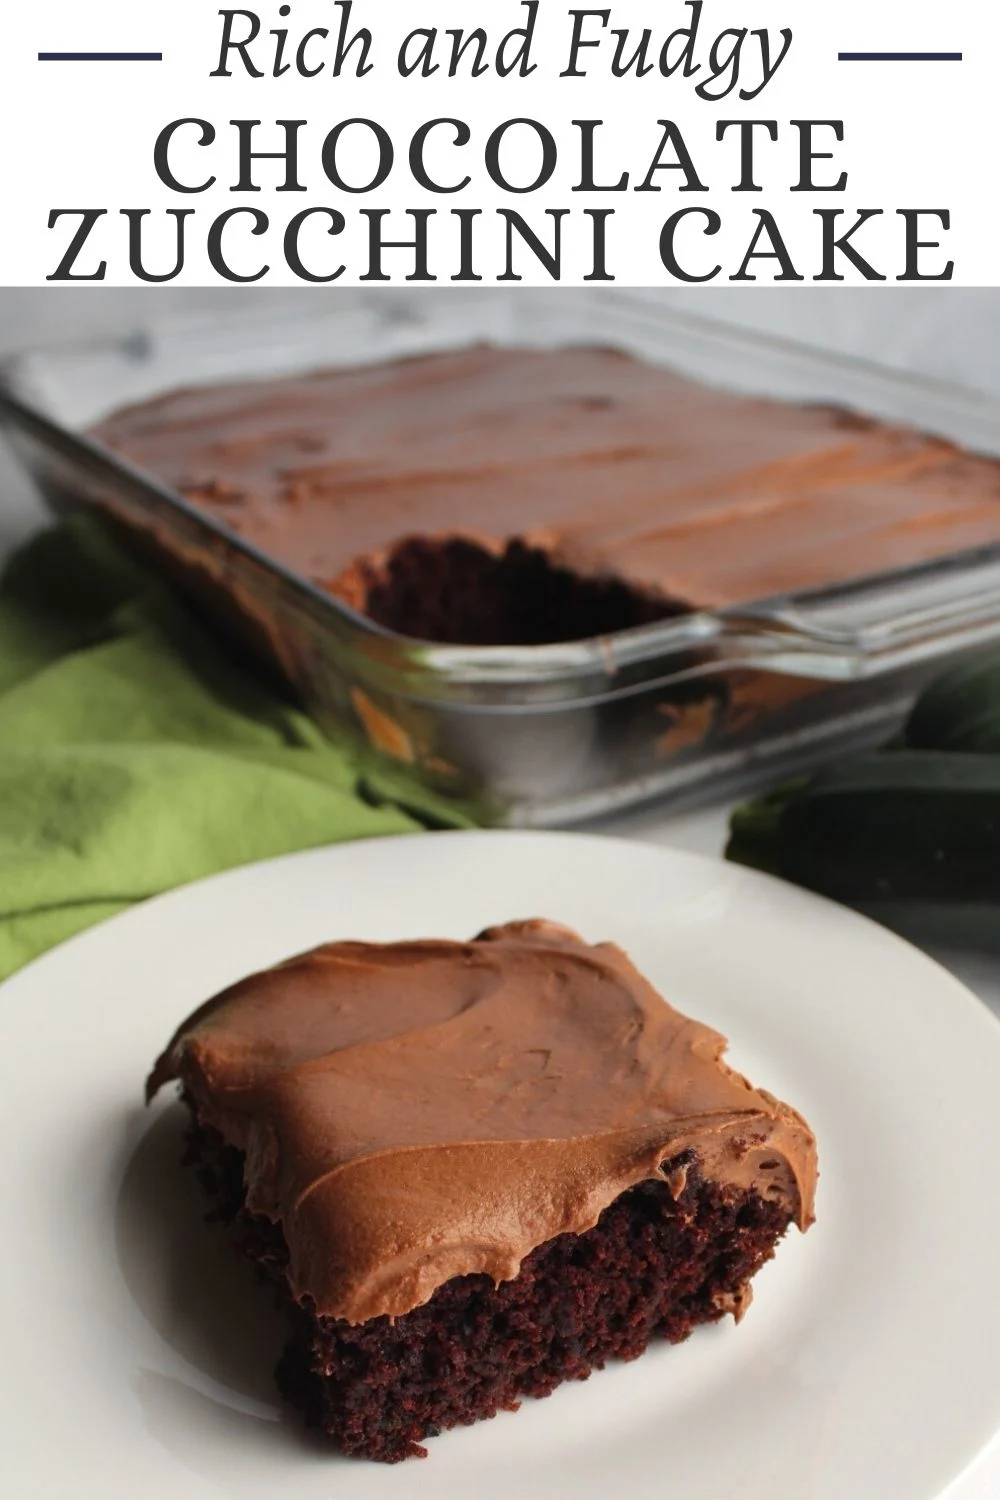 This moist chocolate cake is hiding two whole cups of zucchini inside! It is a perfect way to use some of the extra harvest and who doesn't love cake? The easy frosting takes it to a whole new stratosphere of deliciousness. This great recipe for zucchini chocolate cake is sure to have you looking forward to zucchini season.